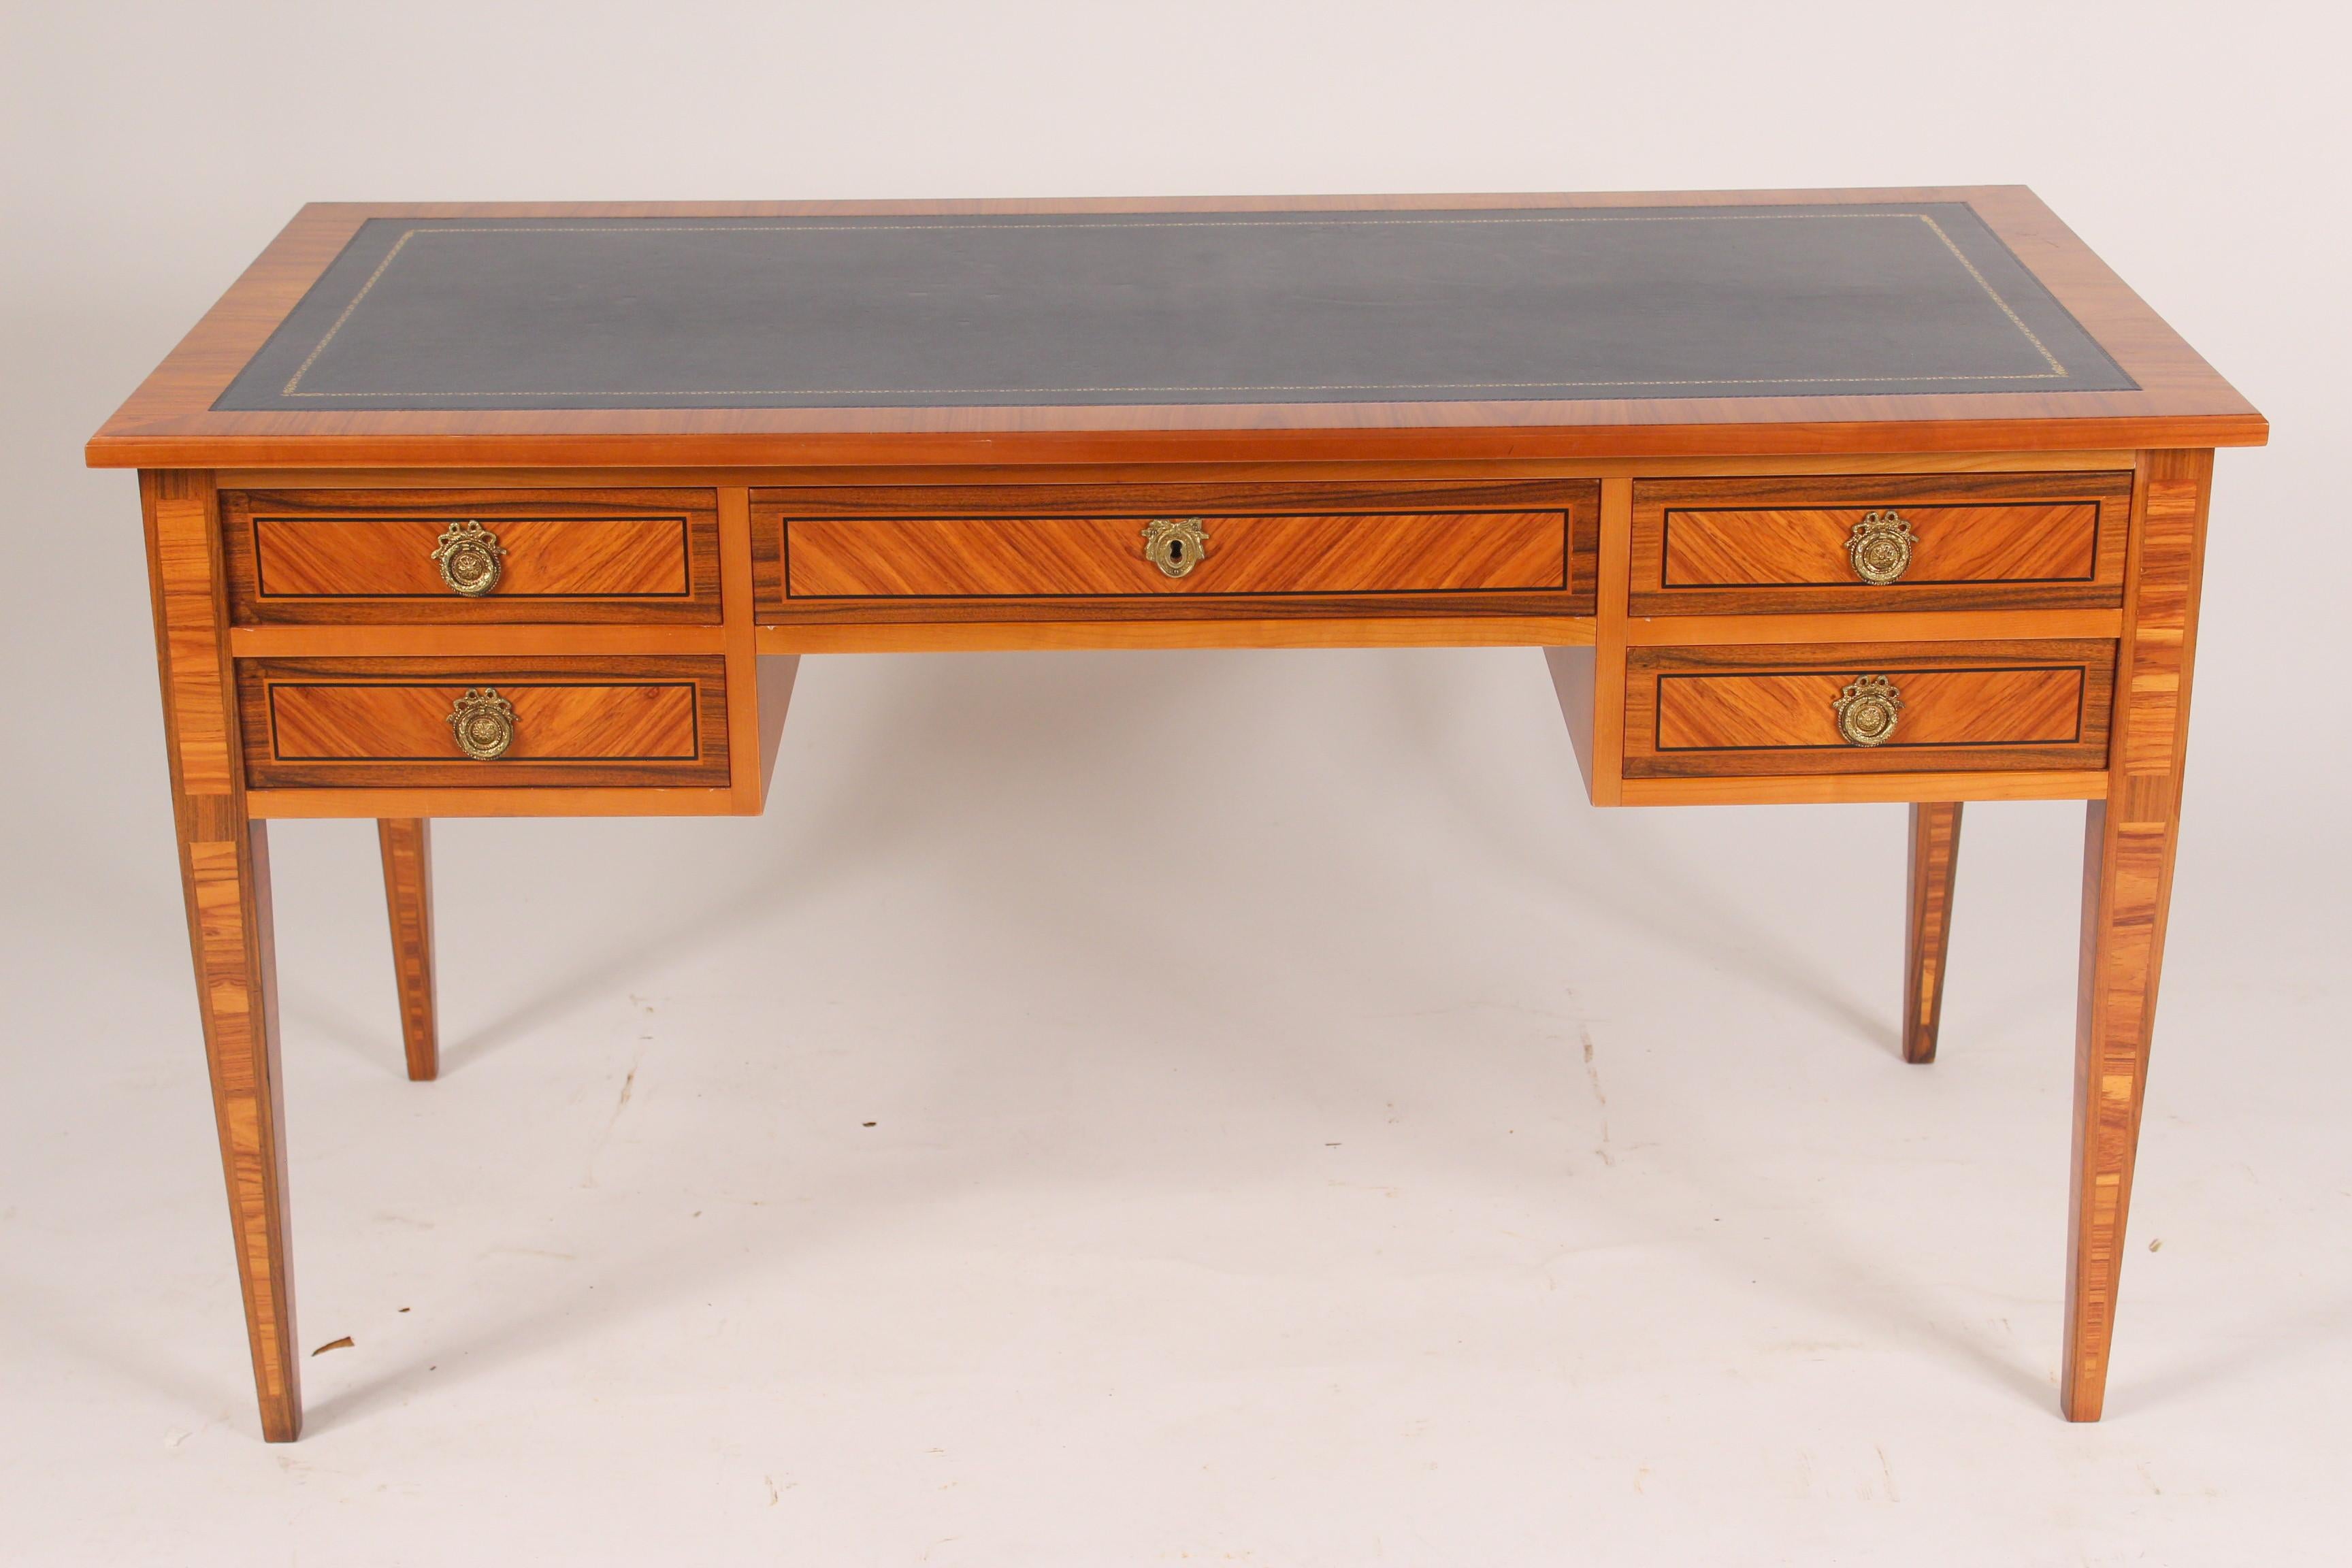 Louis XVI style tulip wood and king wood desk with a blue tooled leather top and pull out writing slides on each end, late 20th century.